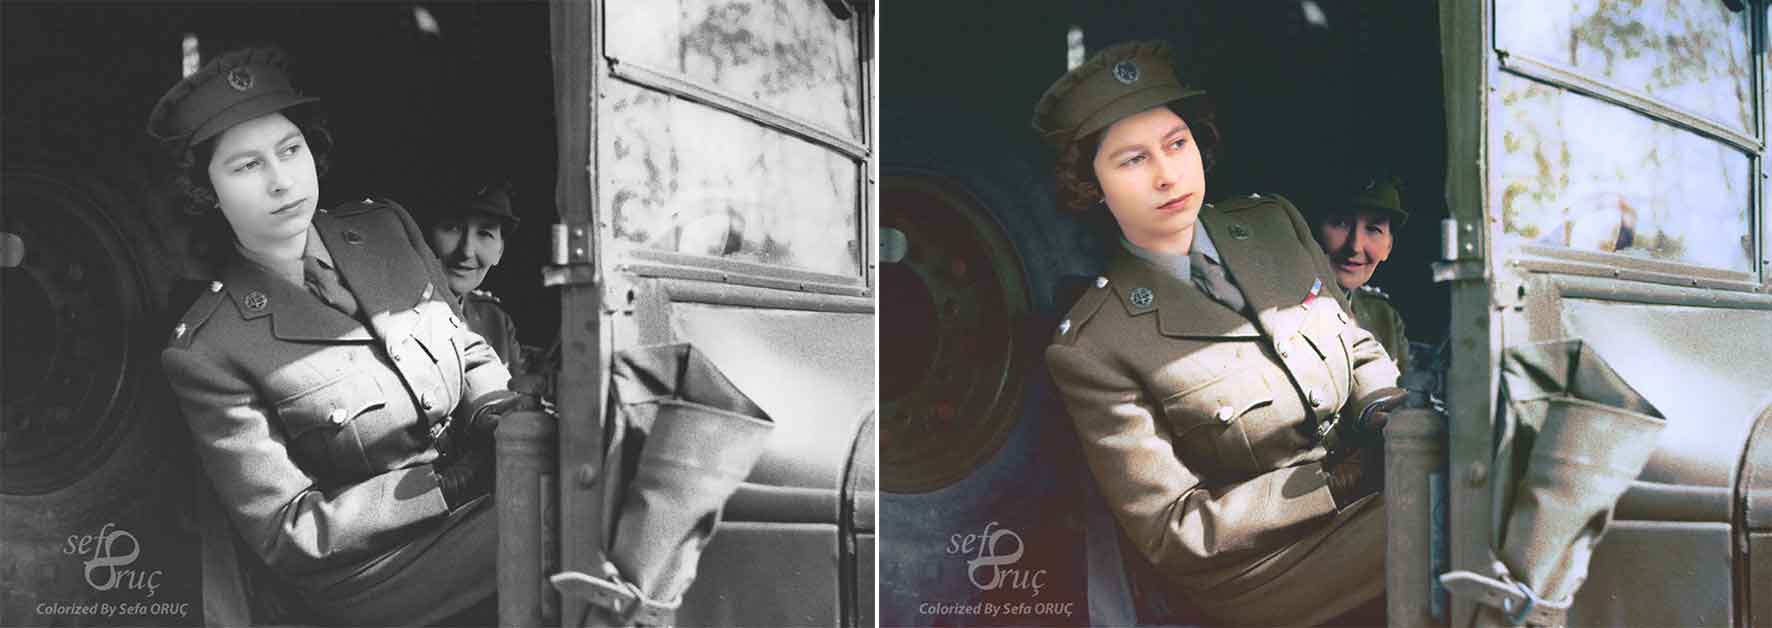 Princess Elizabeth driving an ambulance during her wartime service in the Auxiliary Territorial Service, 10th April 1945.